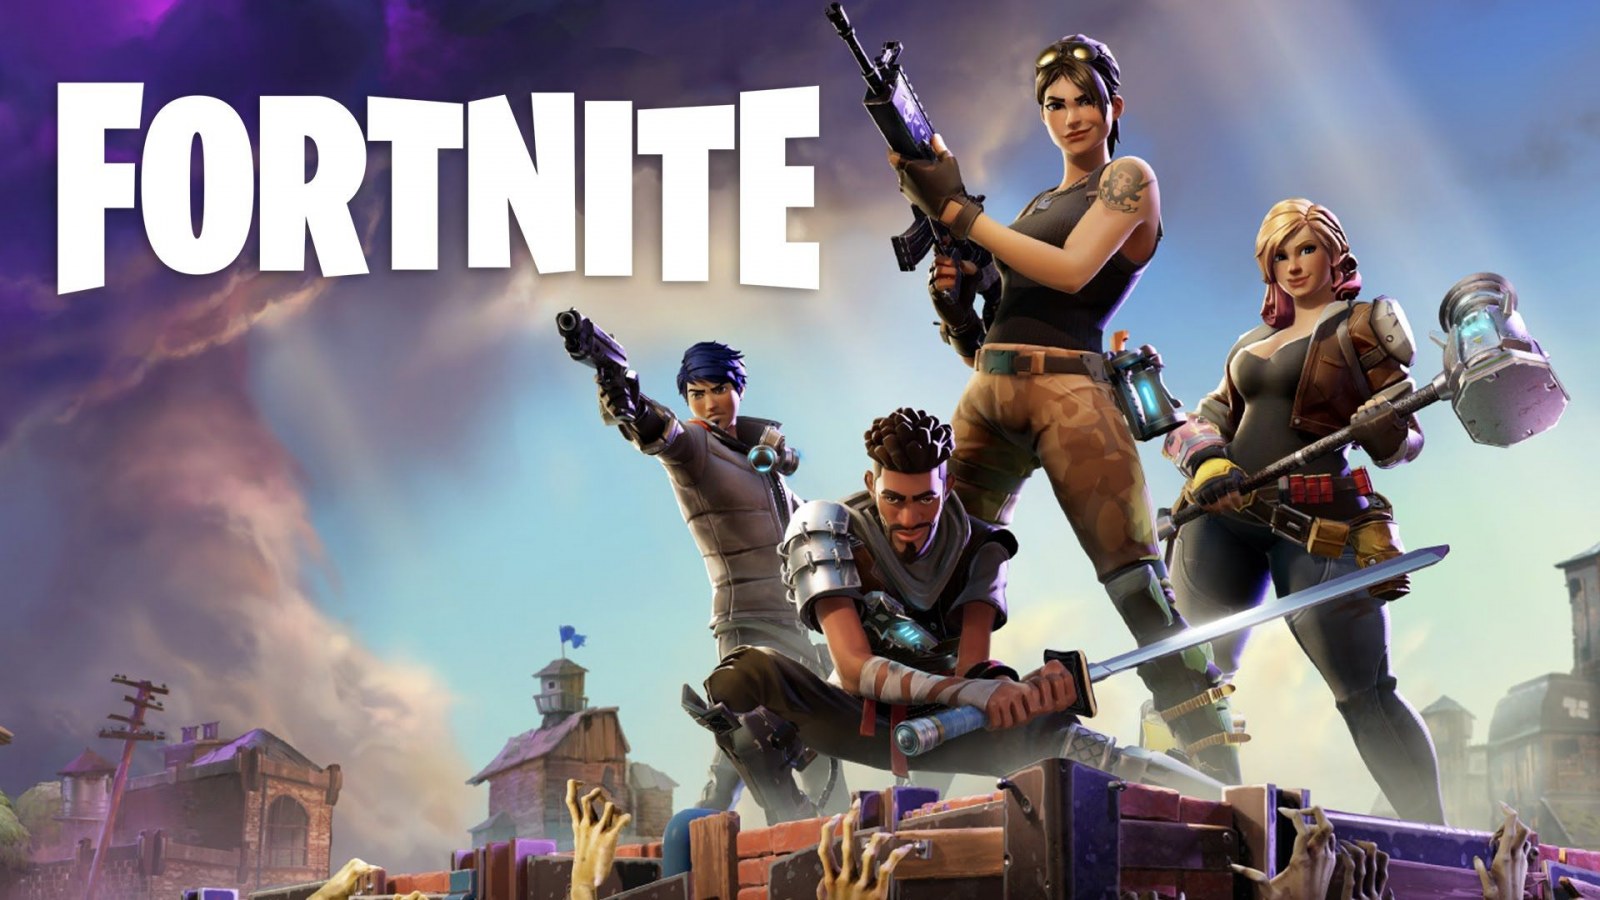 Whether you build or battle, do it together with PlayStation 4 cross-play  for Fortnite — GAMINGTREND